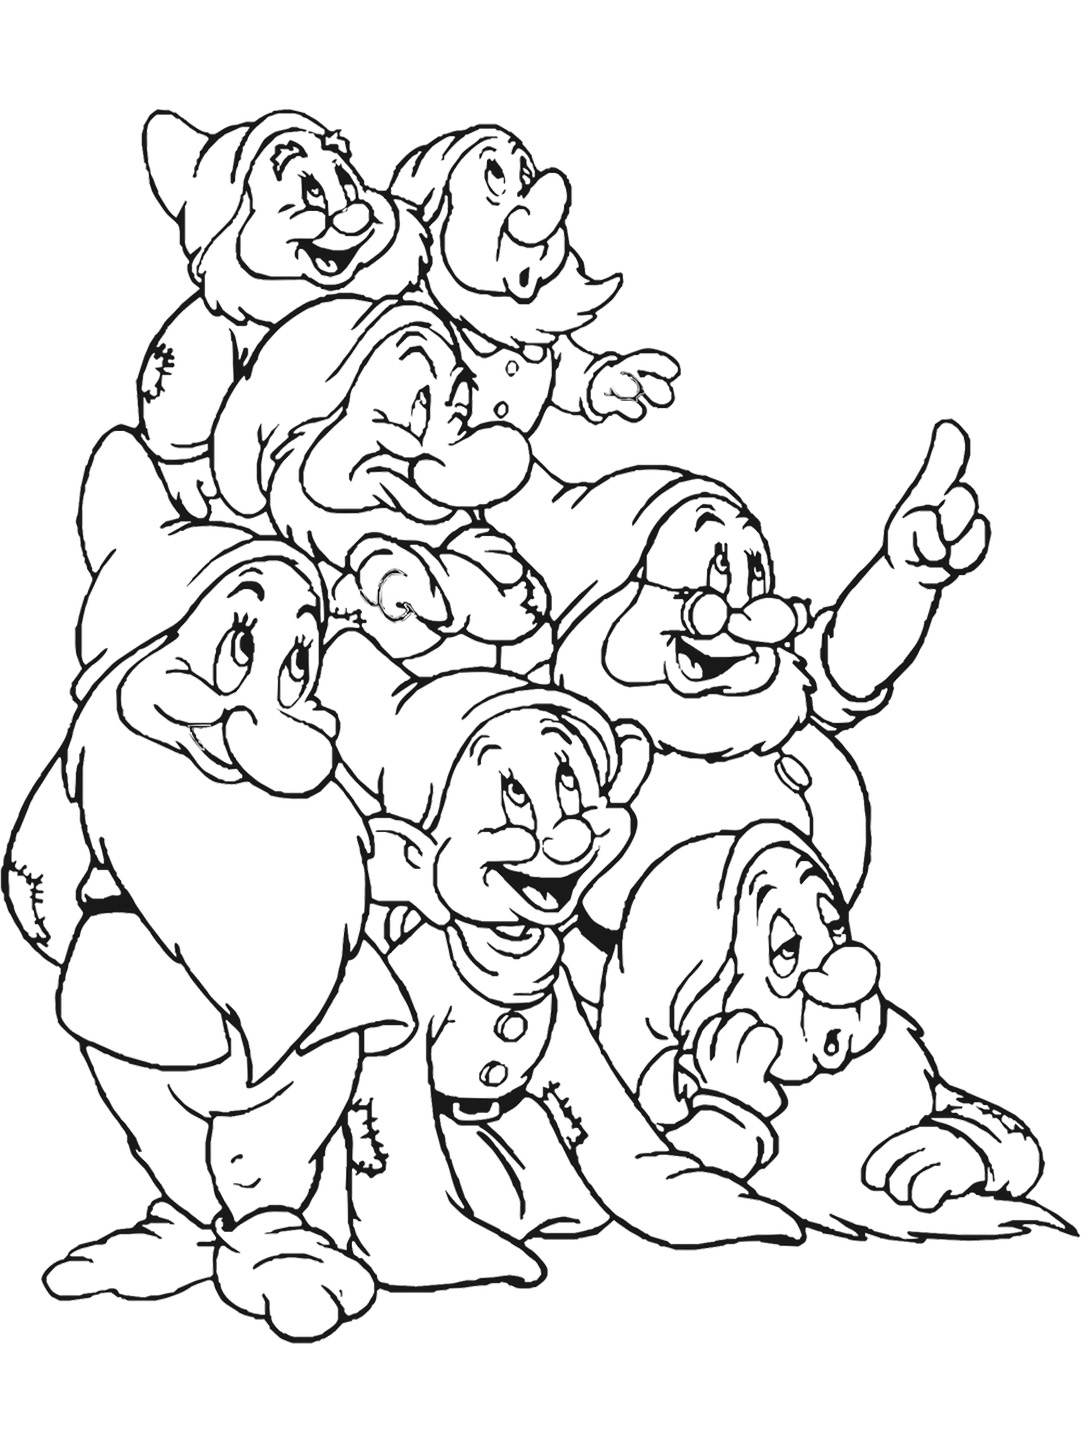 The 7 Dwarfs coloring page